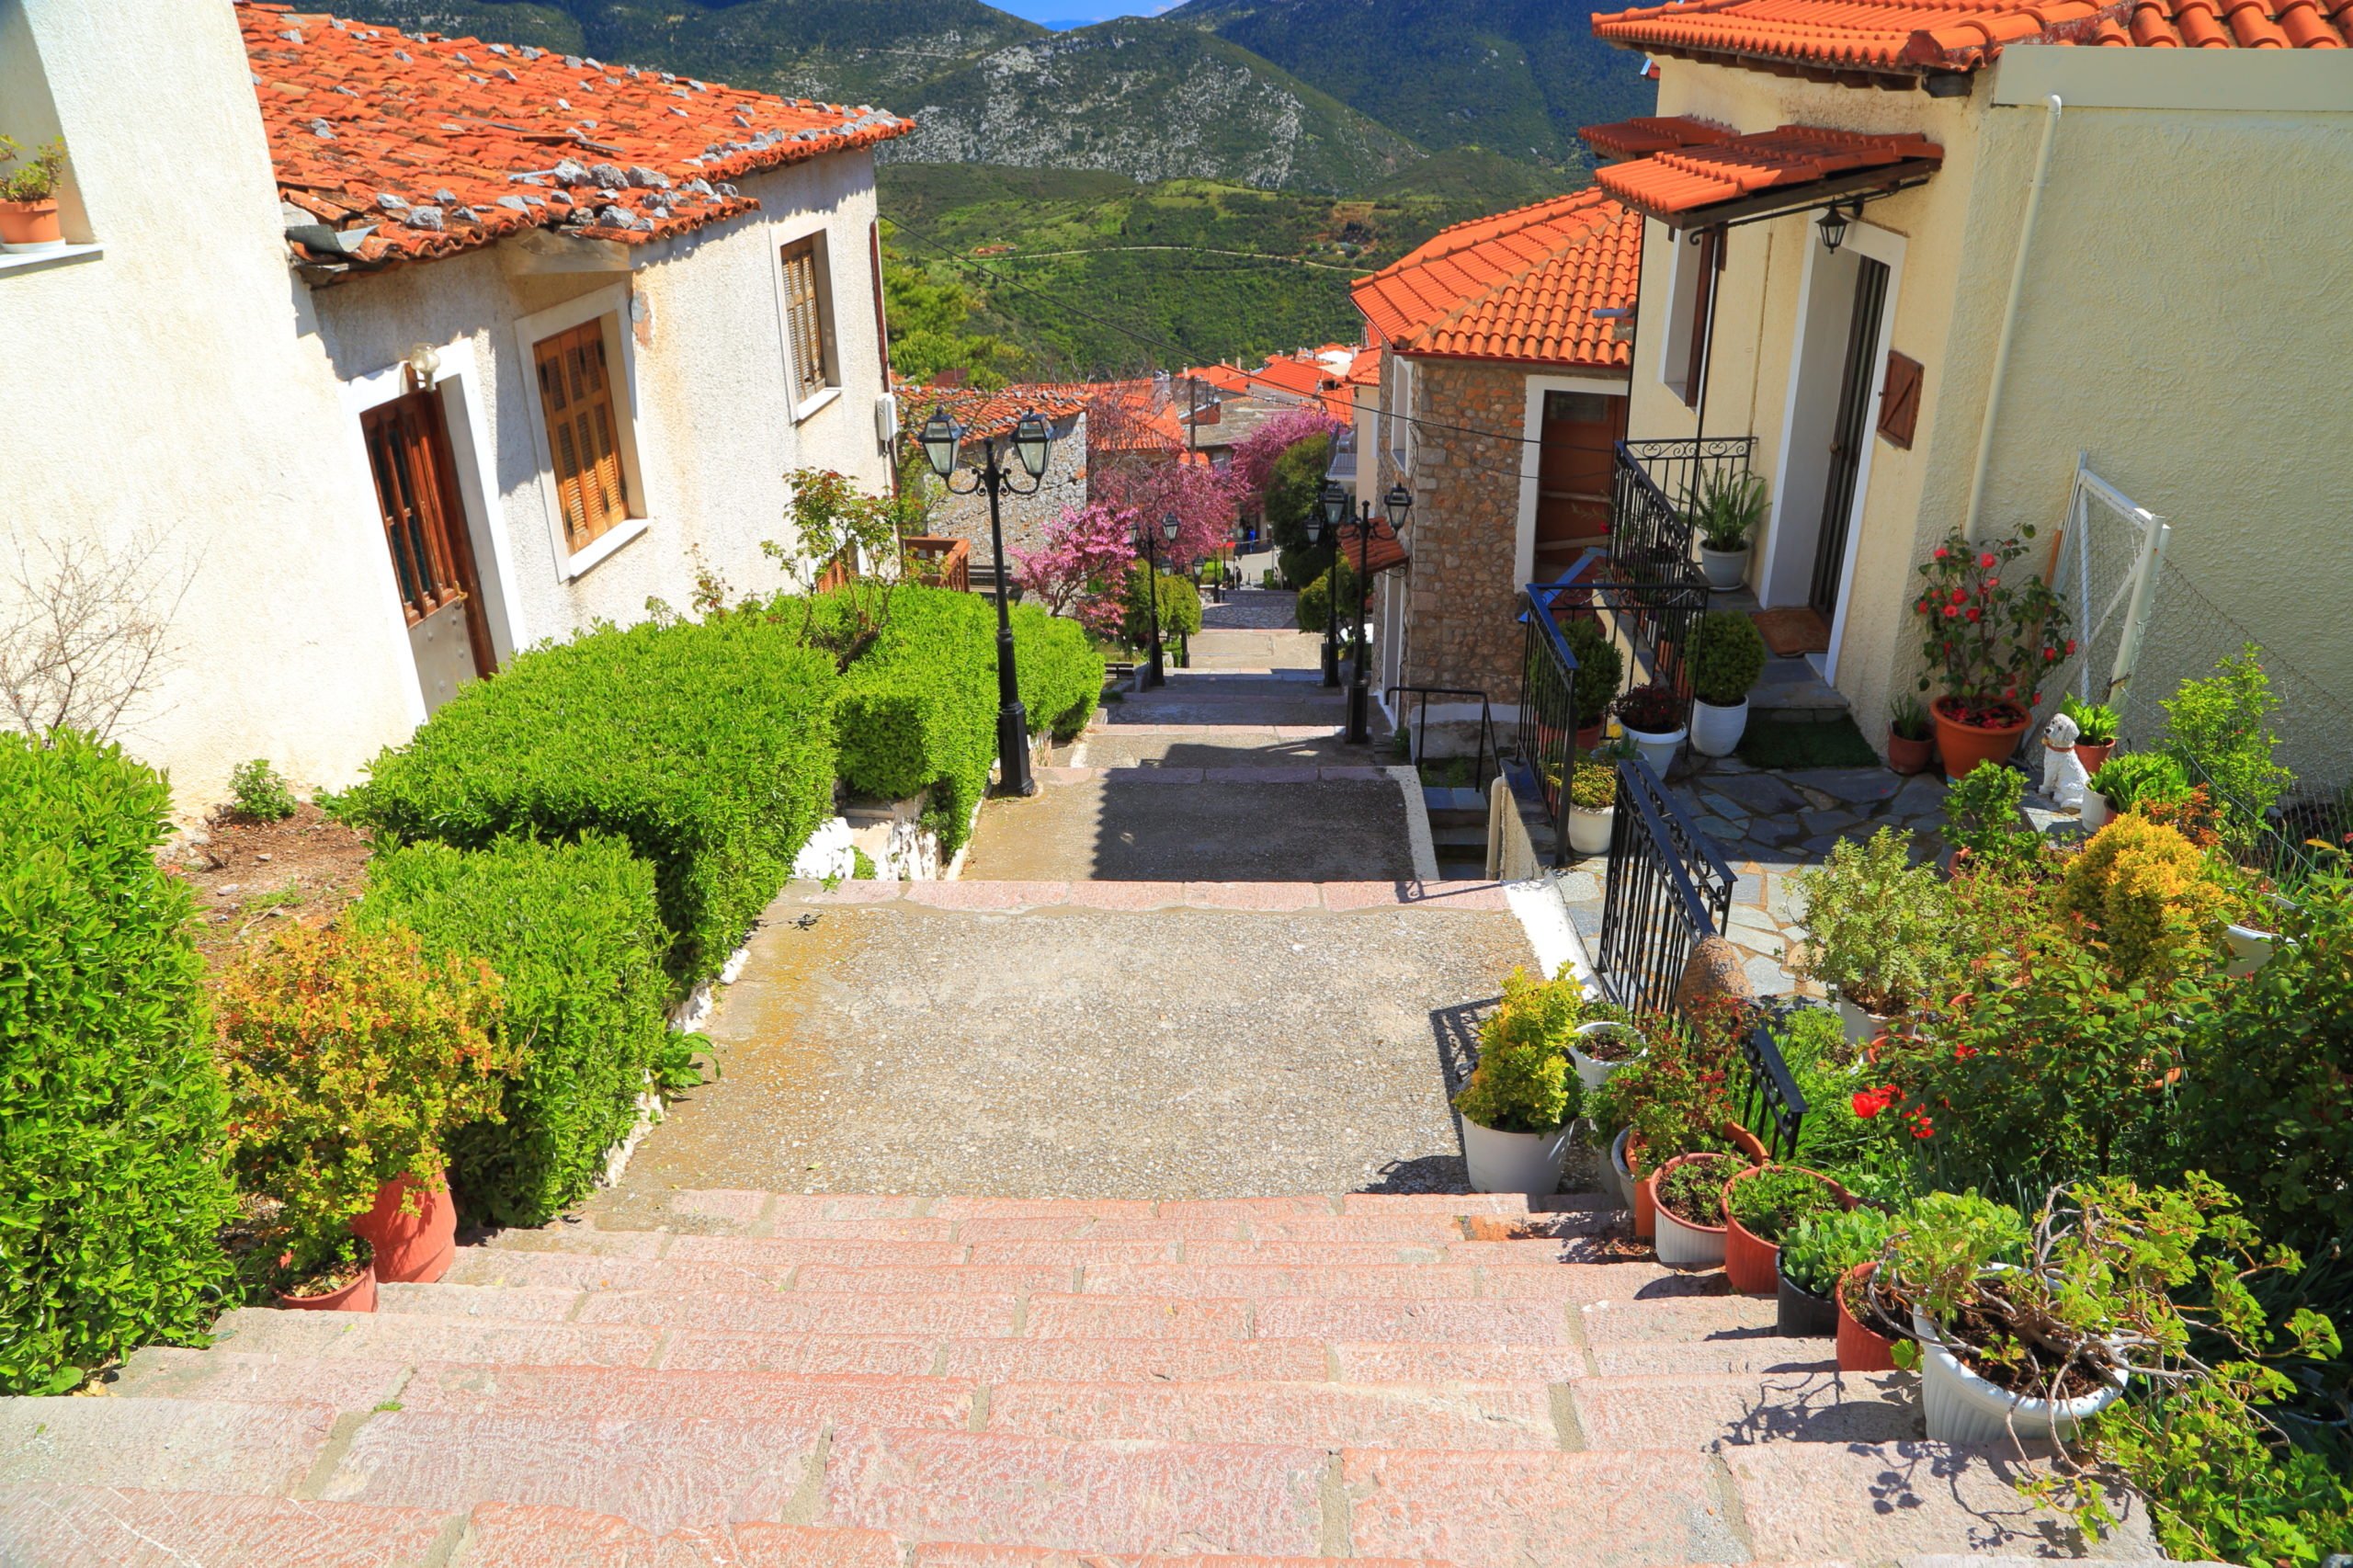 Stroll Through The Streets Of Arachora On The Delphi History And Hiking Tour From Athens